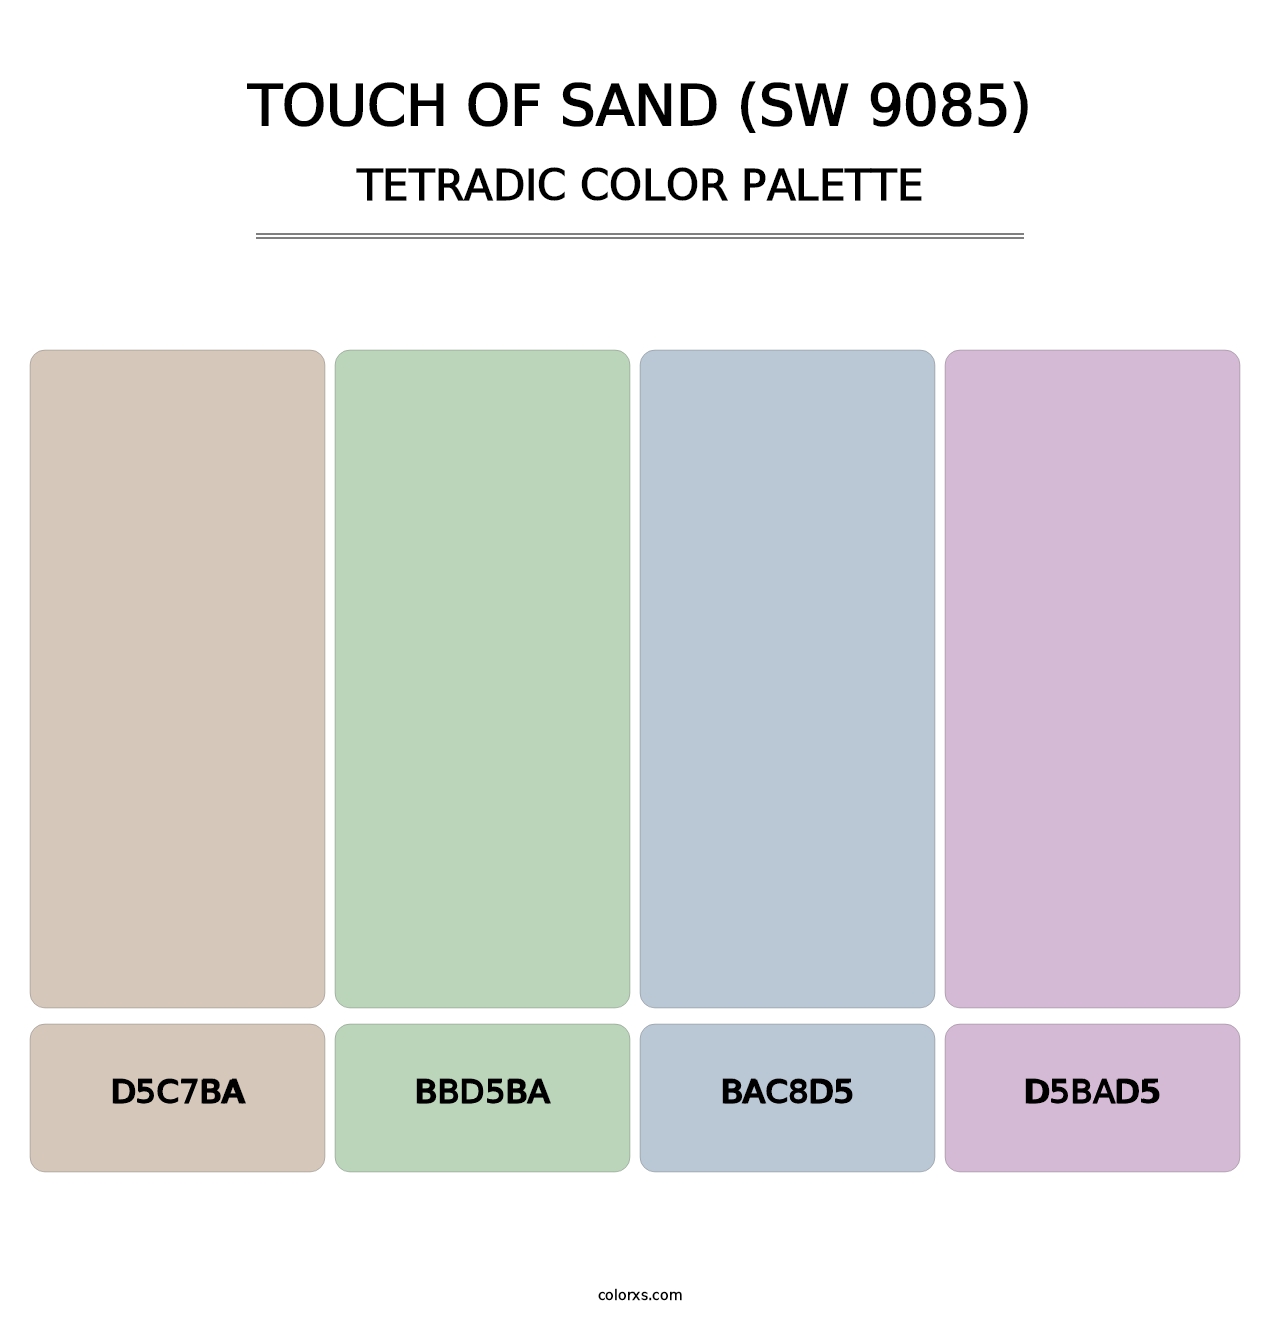 Touch of Sand (SW 9085) - Tetradic Color Palette